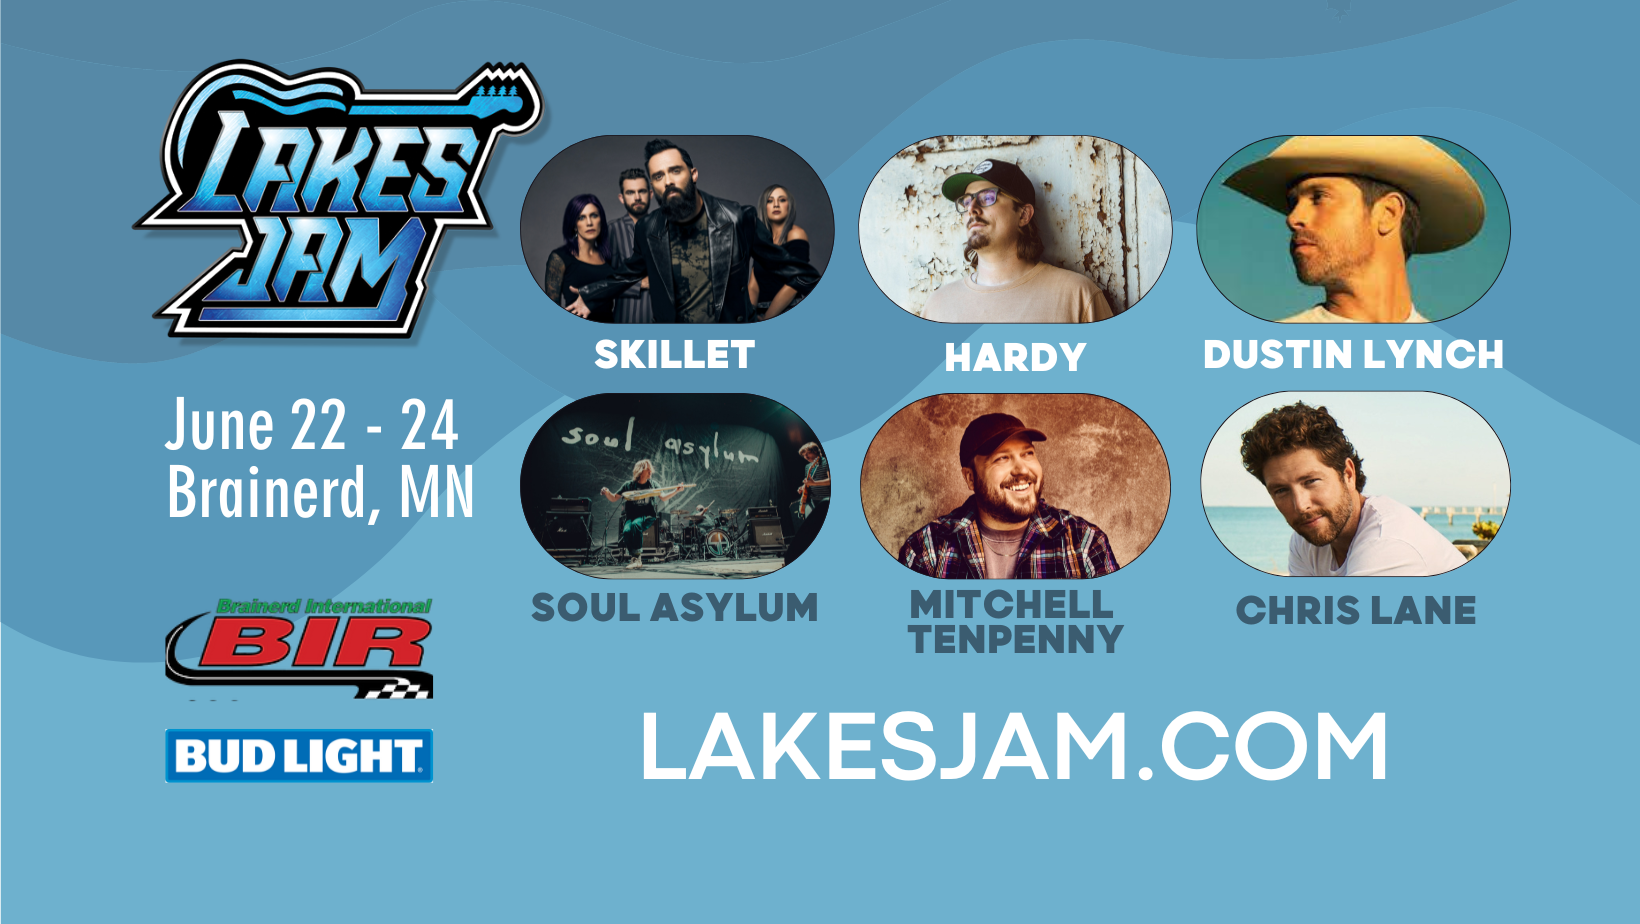 Lakes Jam Hardy, Dustin Lynch & Skillet 3 Day Pass at Brainerd